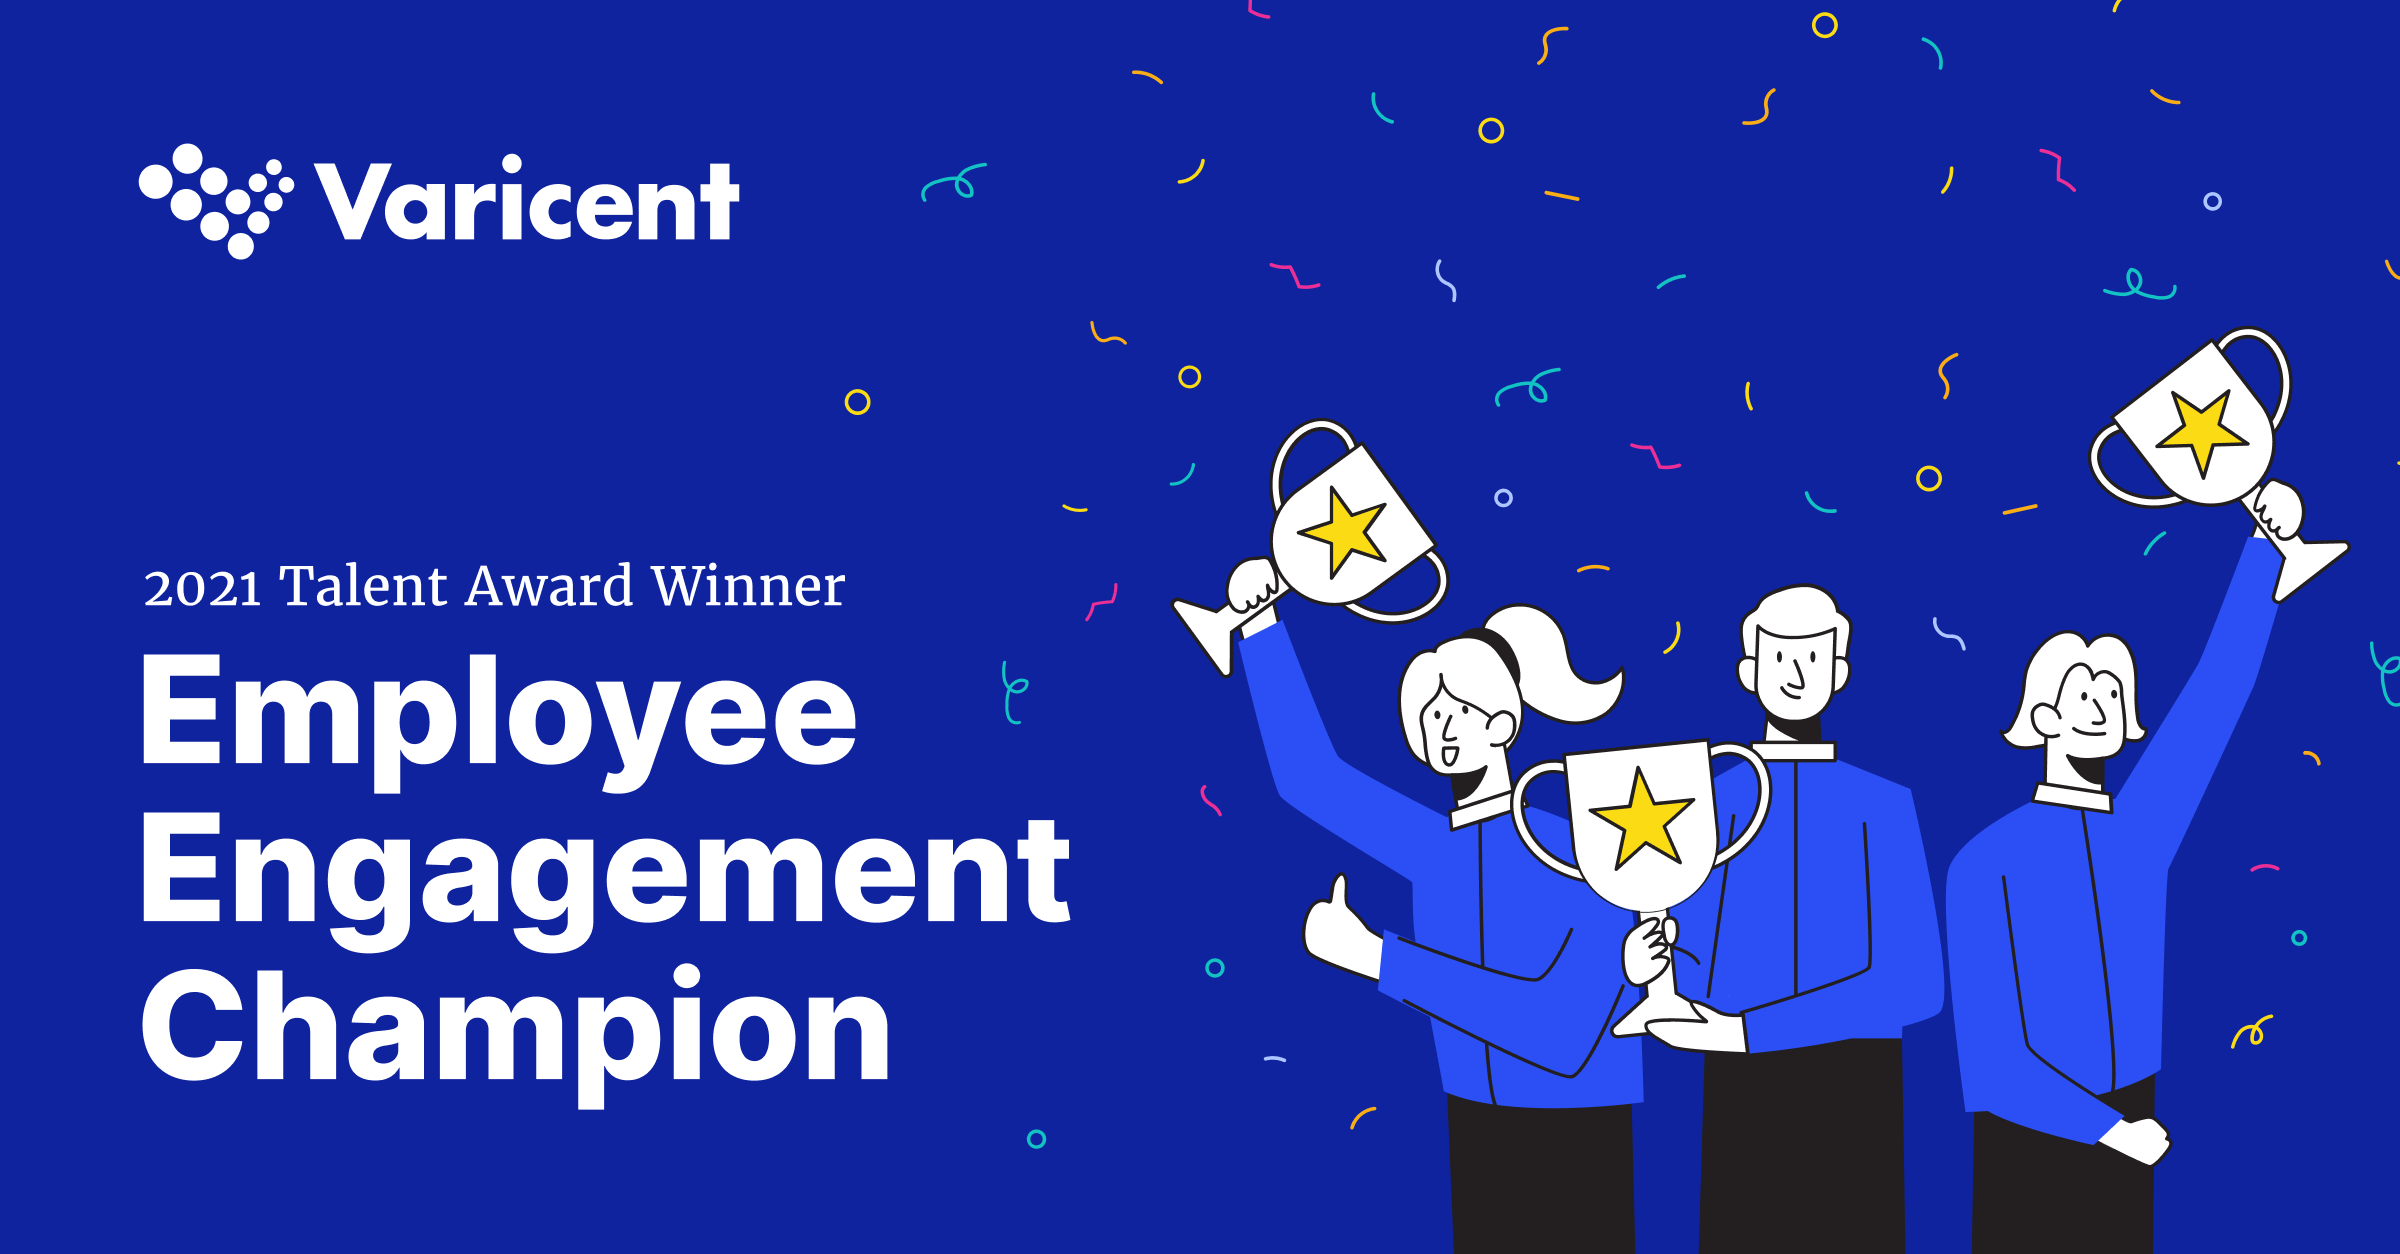  Varicent has been named Employee Engagement Champion at LinkedIn's 2021 Talent Awards